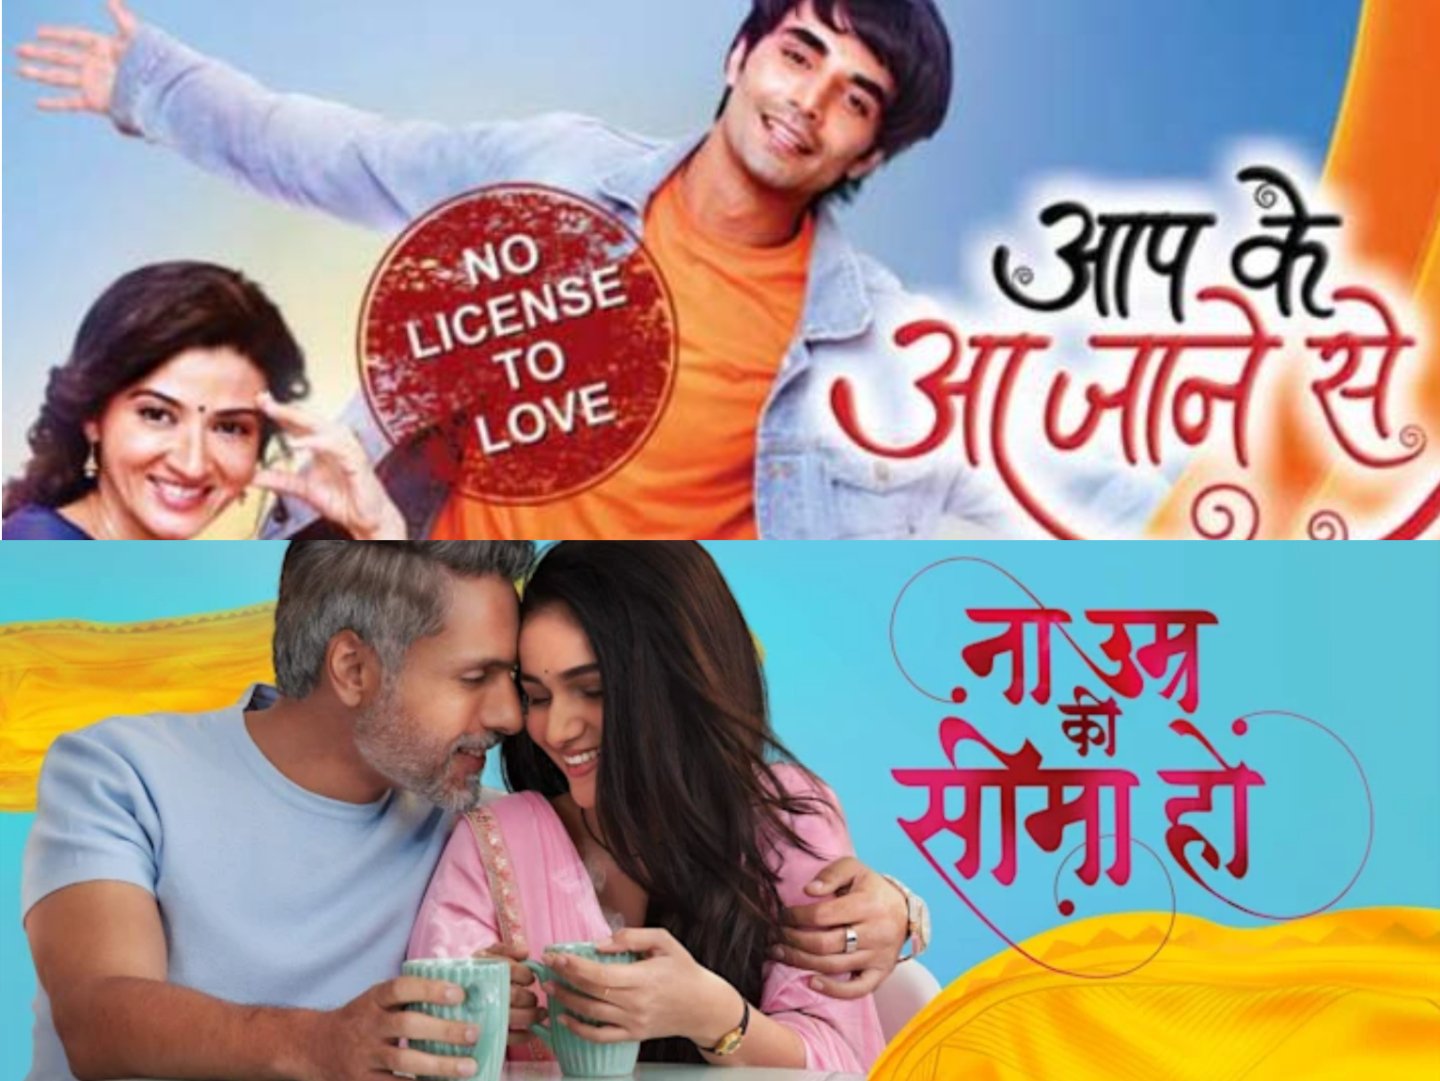 TV shows with age-gap love stories